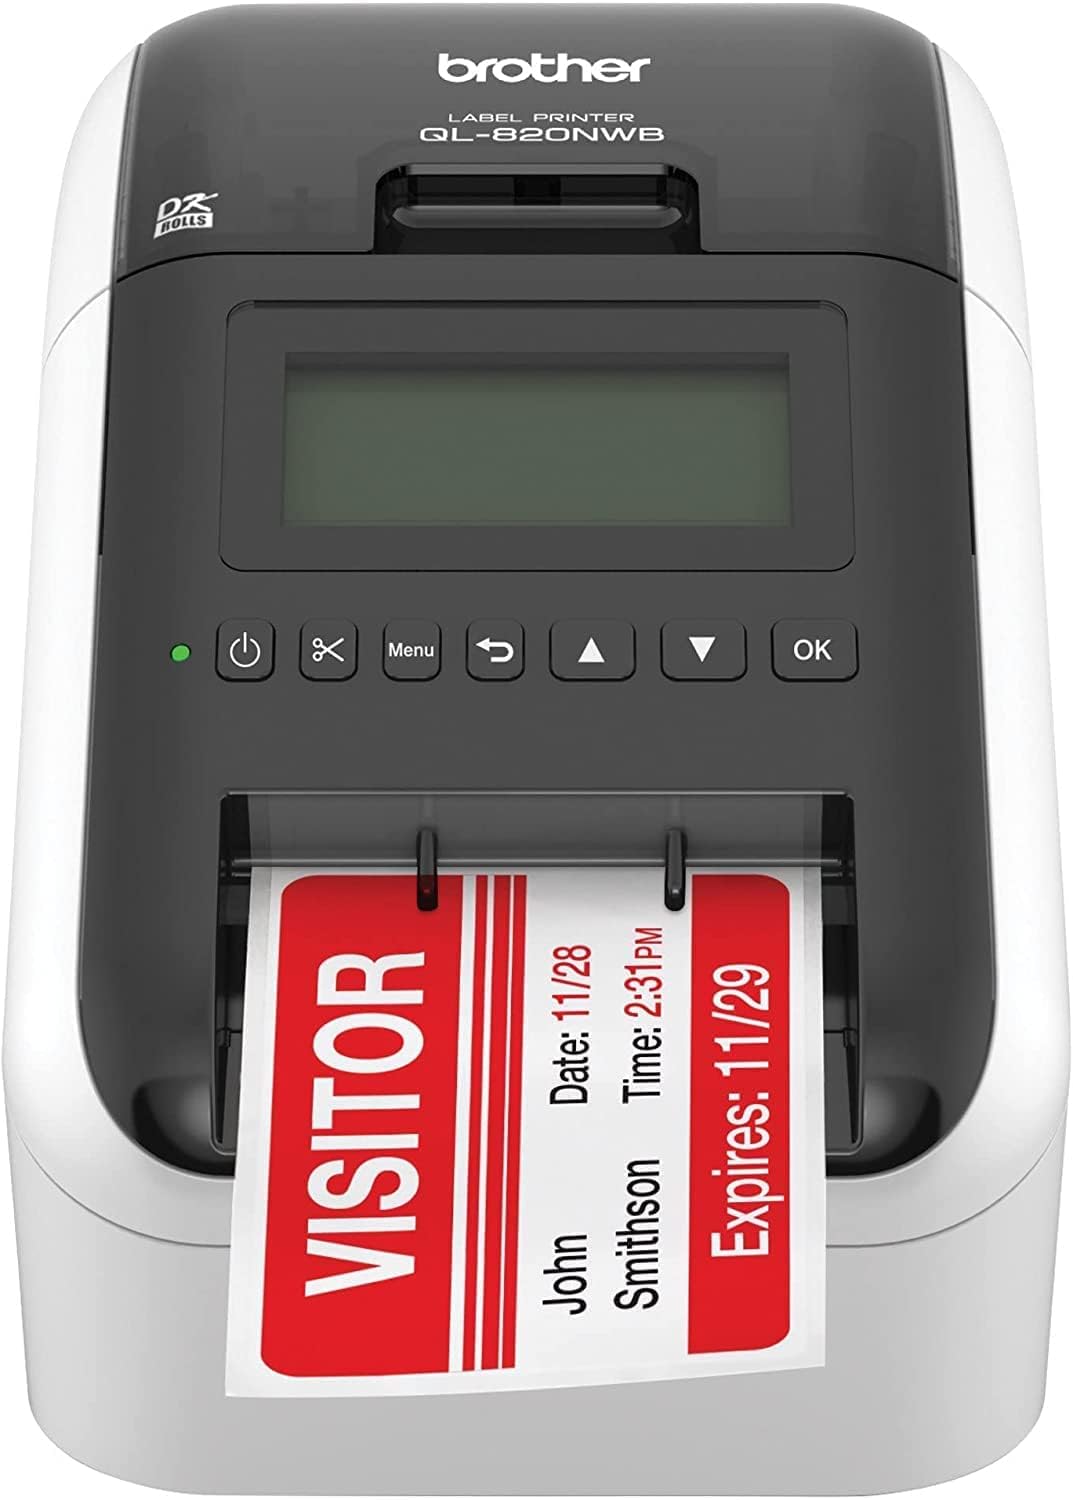 Brother QL-820NWB Professional Label Printer, White - WiFi, Ethernet and Bluetooth Connectivity - Ultra Flexible, 110 Labels Per Minute, 300 x 600 dpi, Auto Cut, Includes 1 Roll of 400 Address Labels